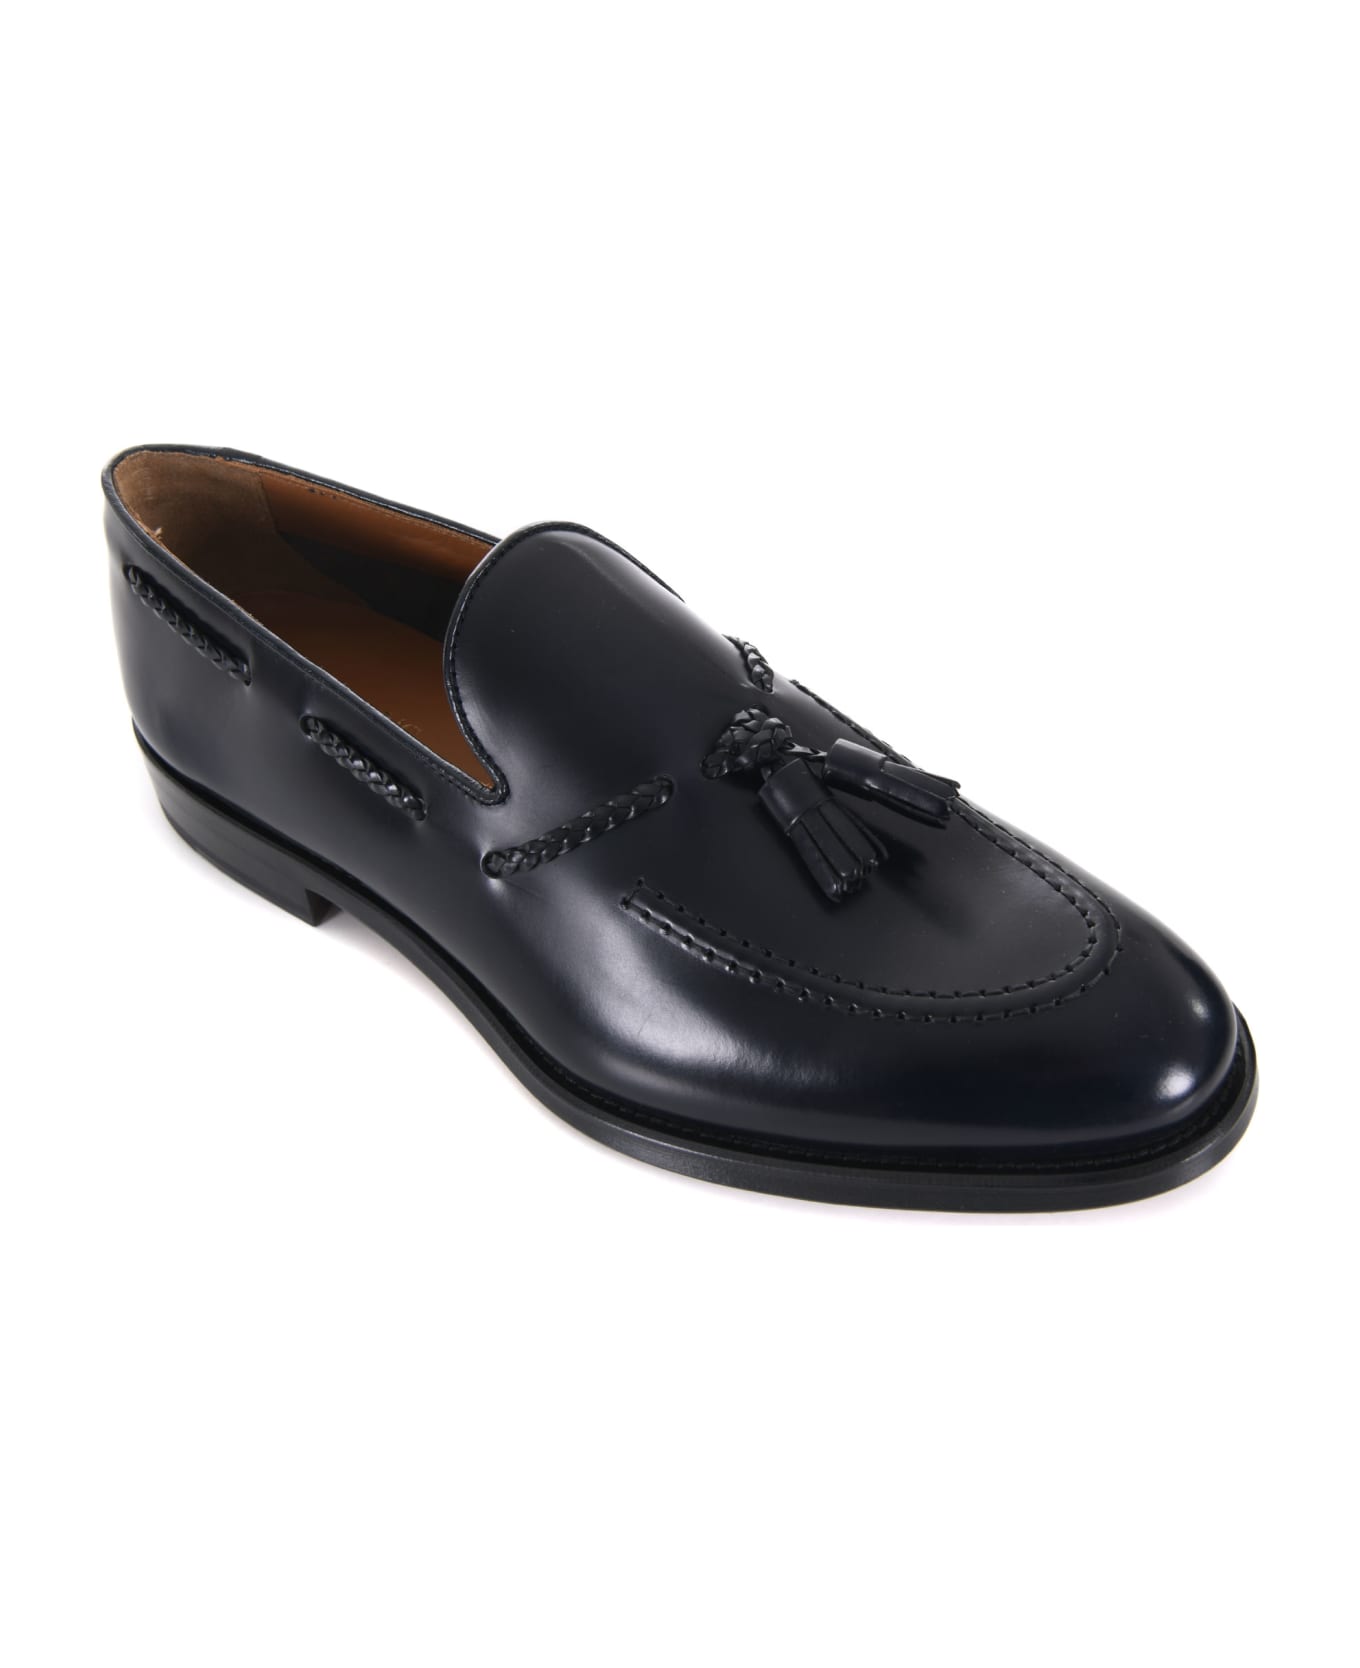 Doucal's Loafers - Blu notte